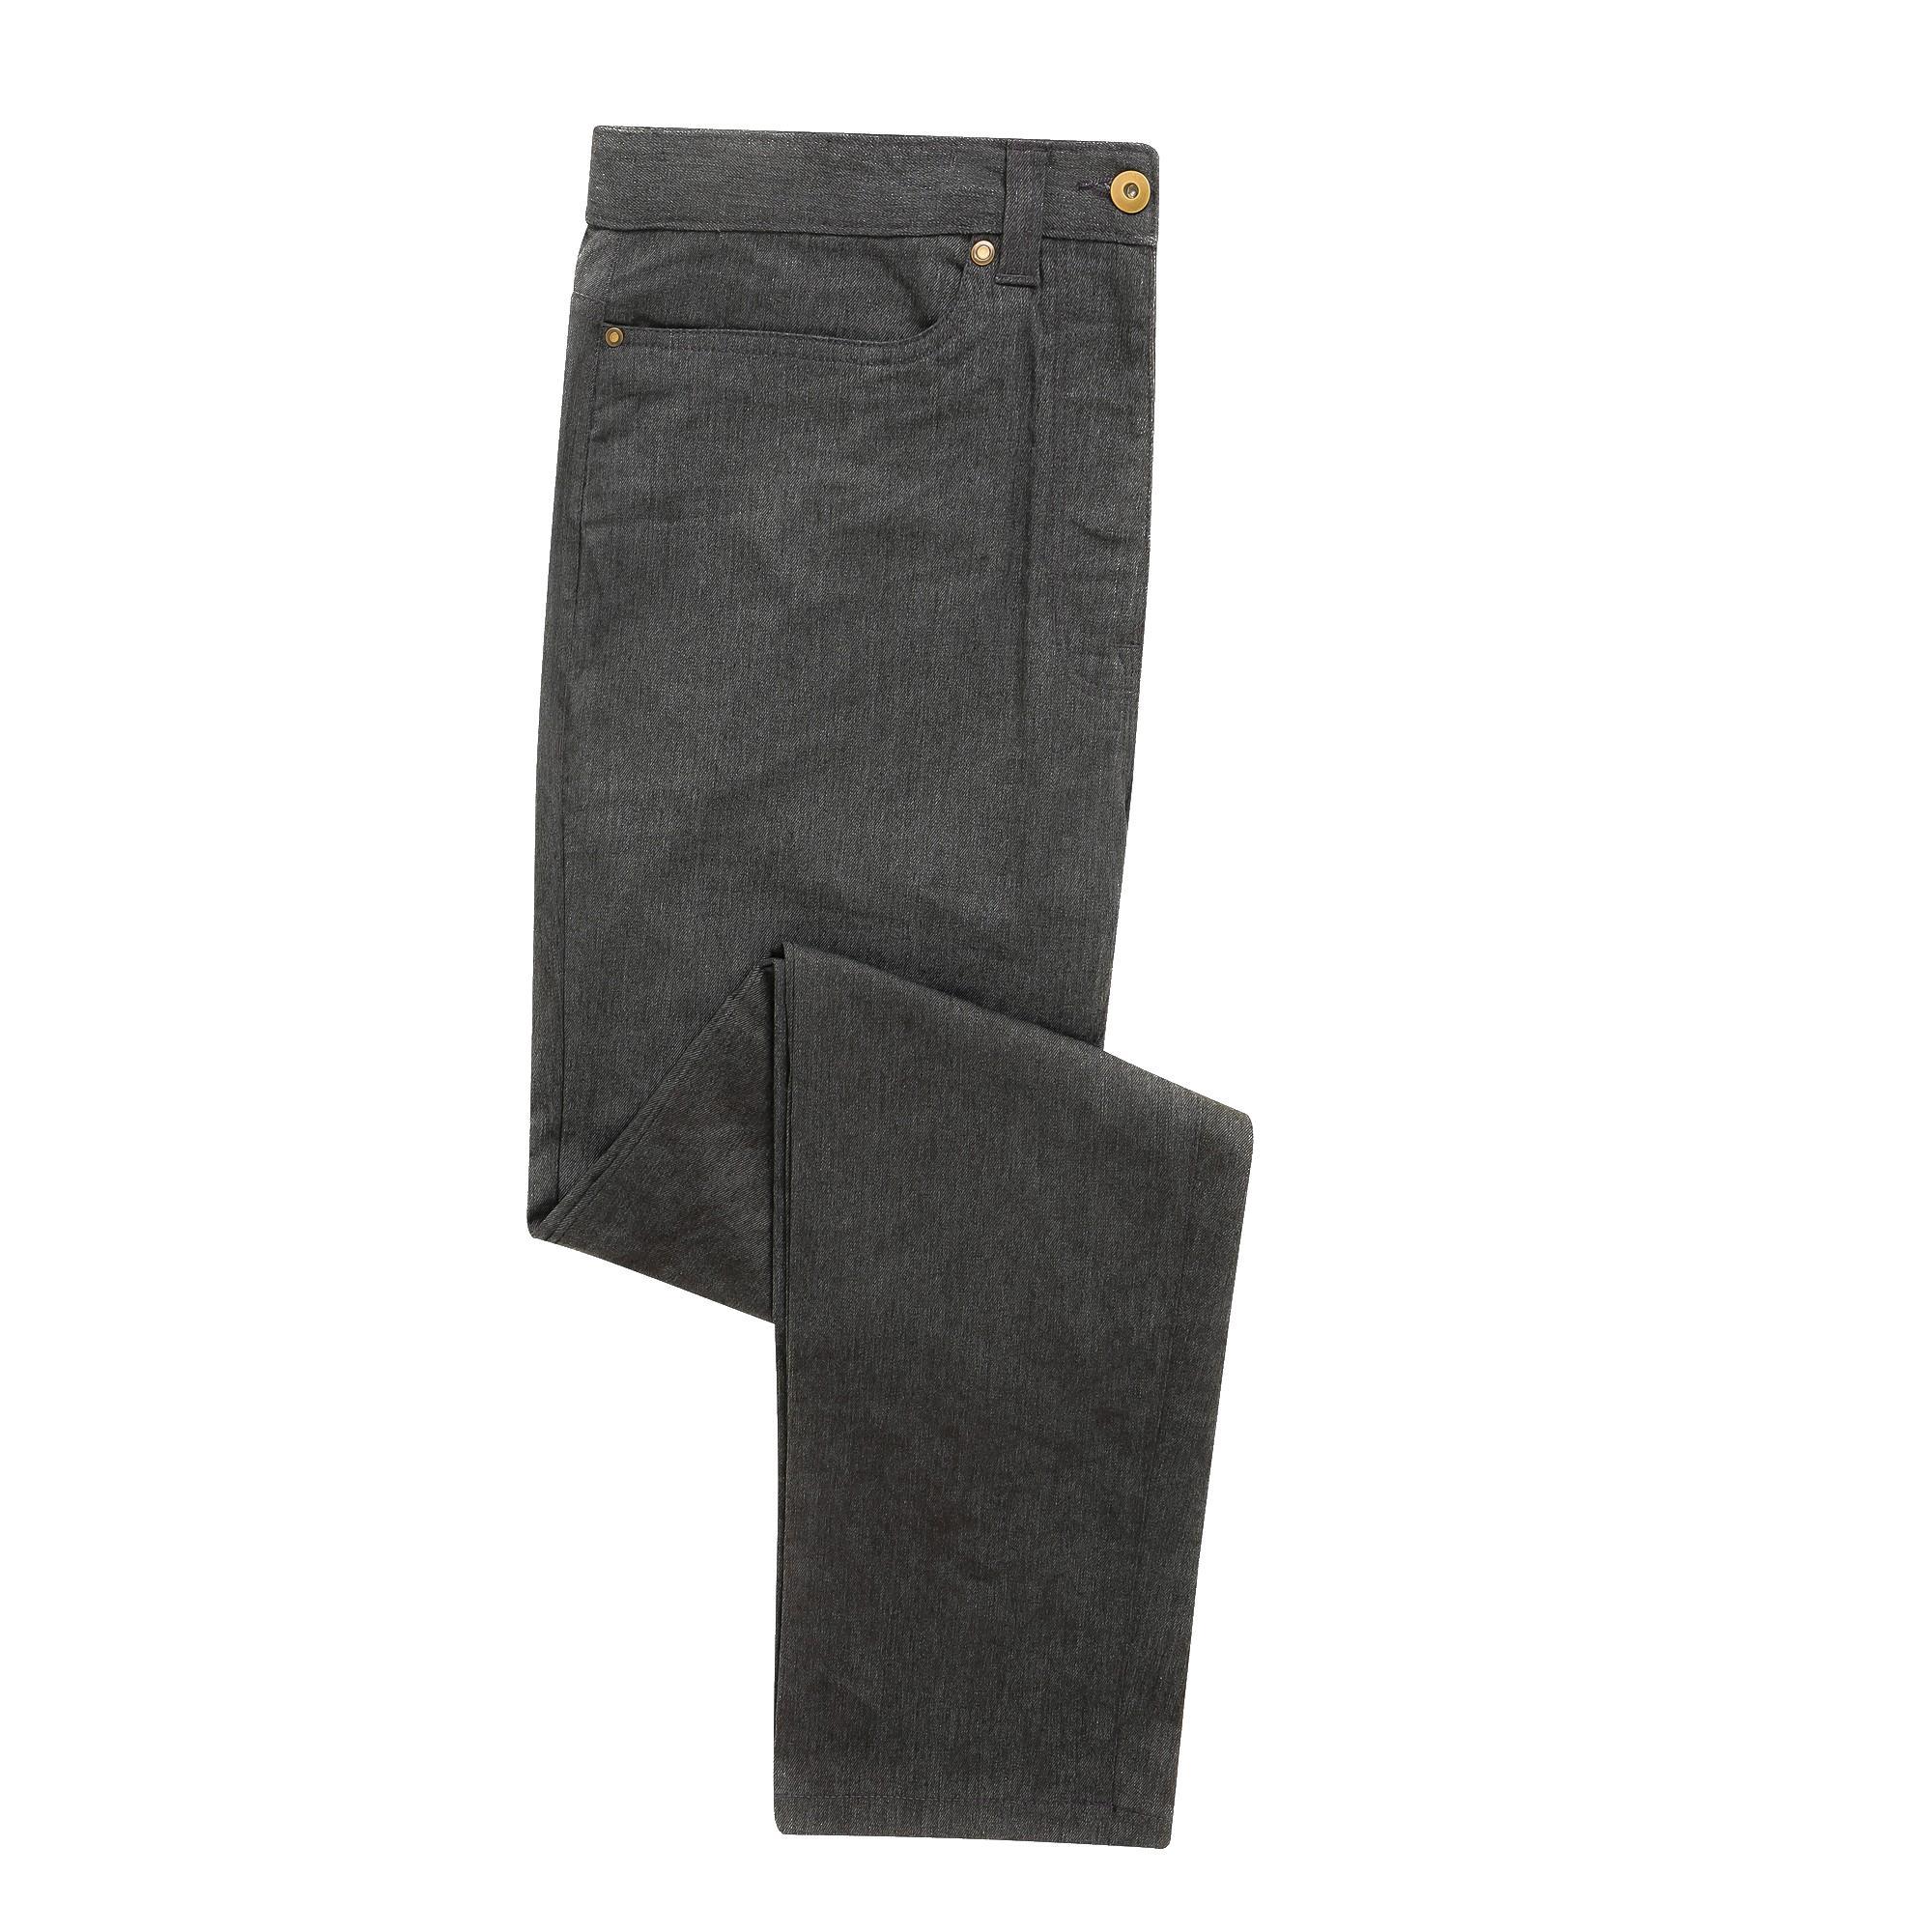 Premier Mens Performance Chinos (Charcoal) (34L)